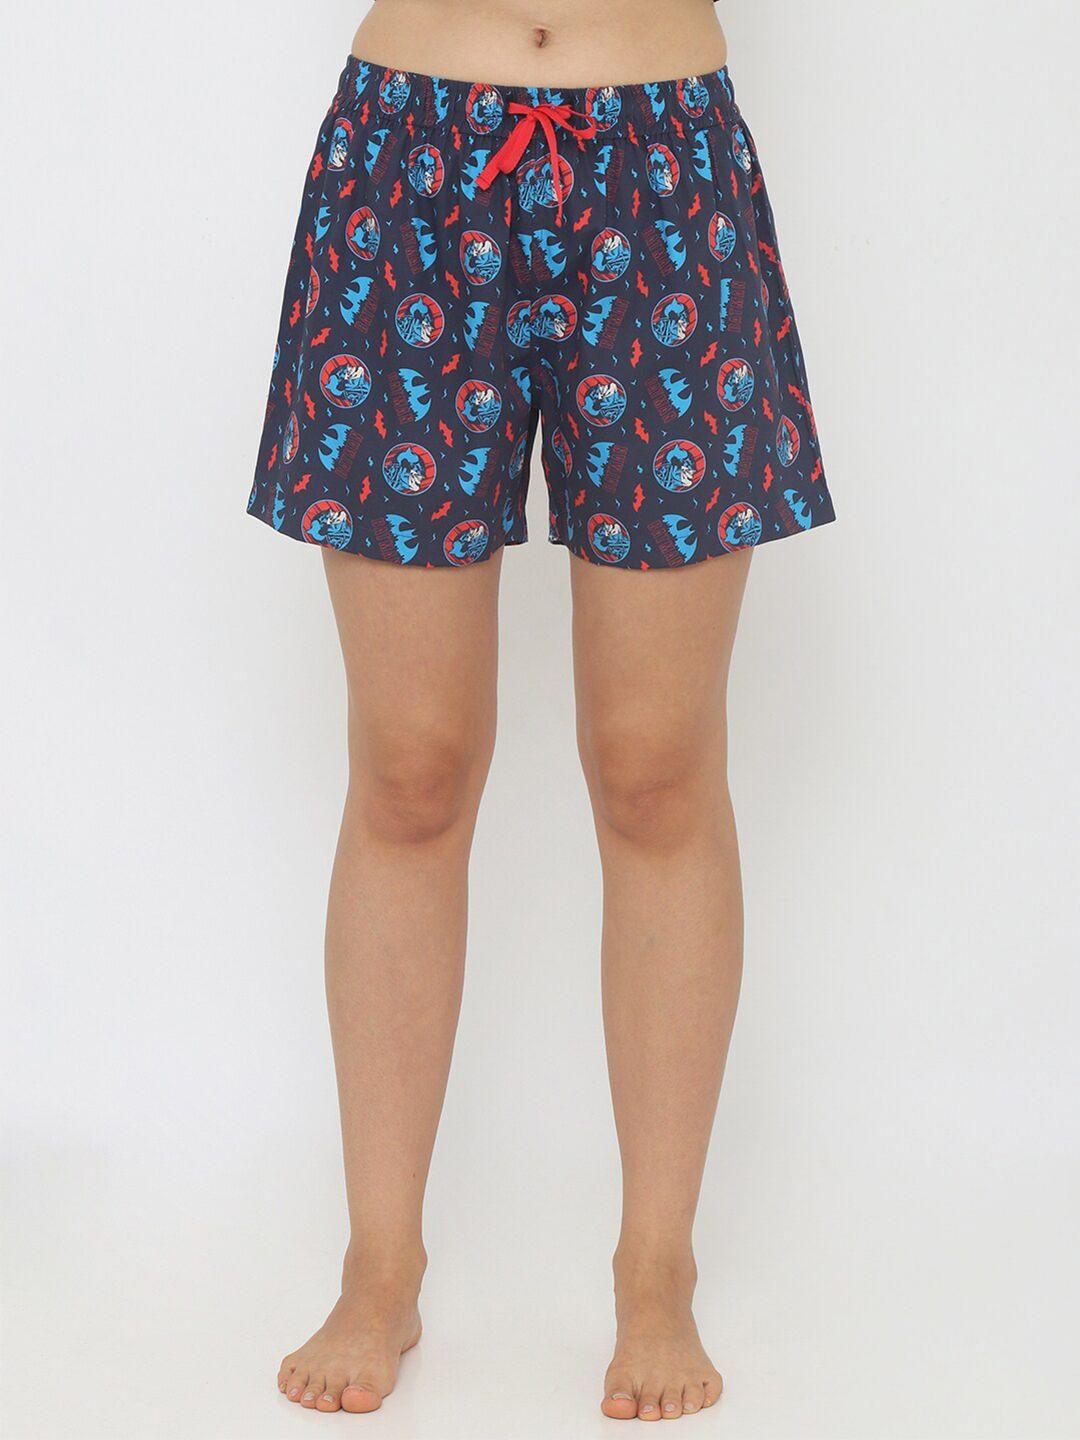 smugglerz-women-navy-blue-&-red-high-rise-printed-lounge-shorts